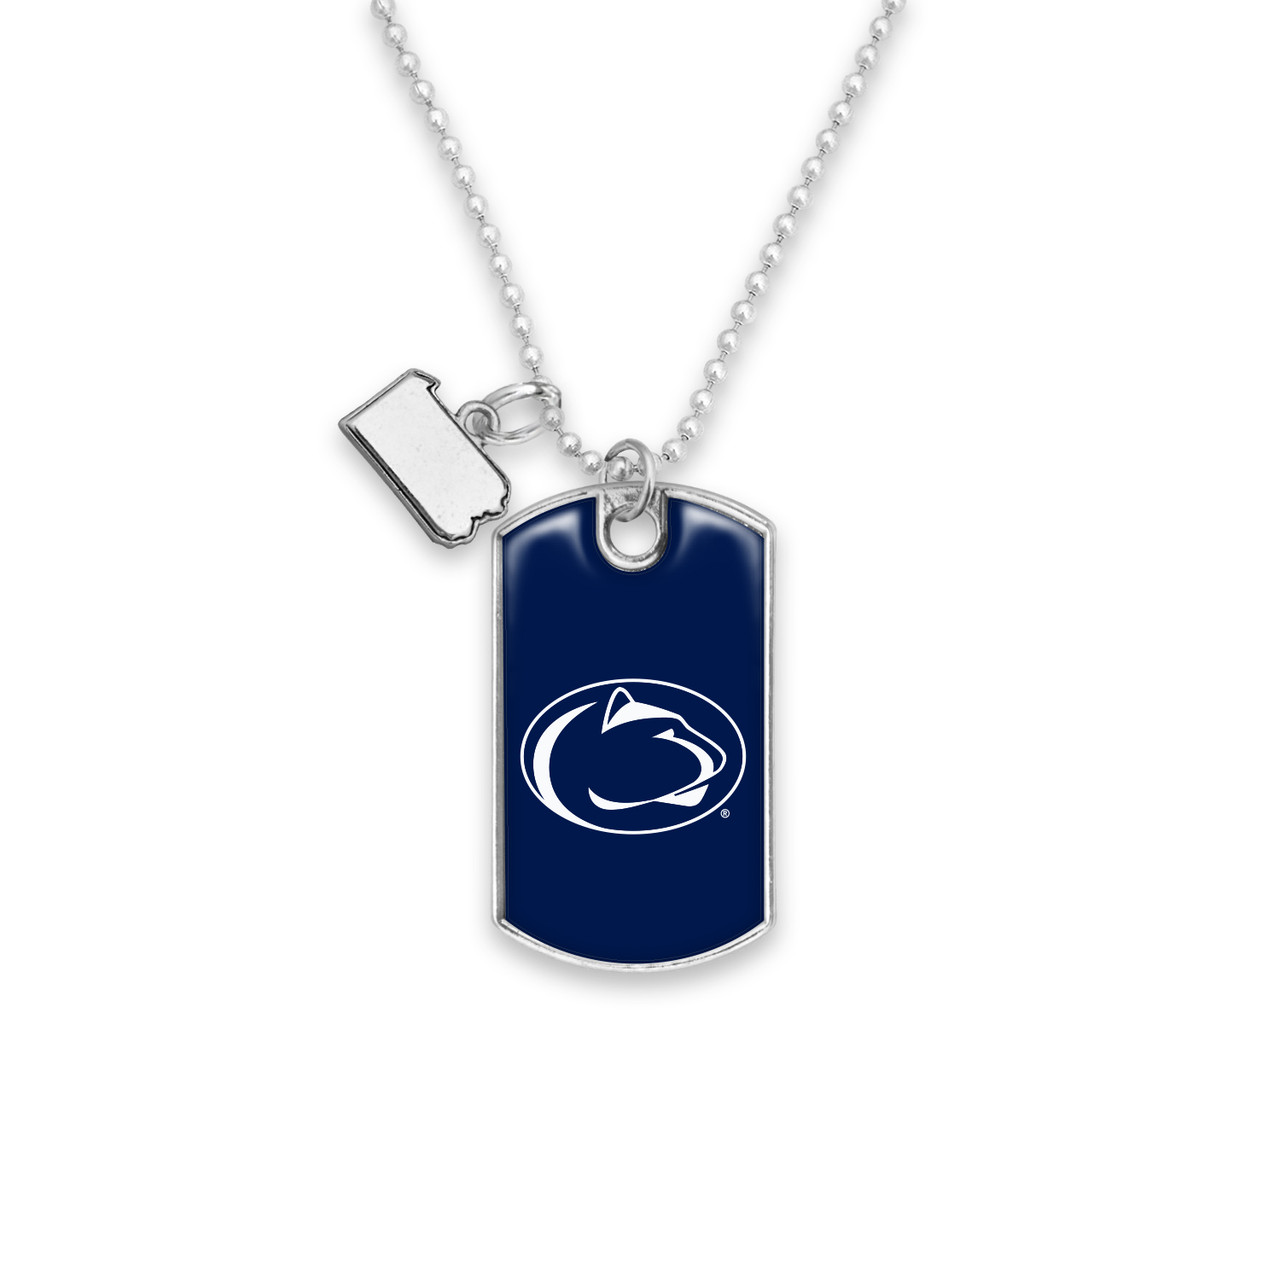 Penn State Nittany Lions Car Charm- Rear View Mirror Dog Tag with State Charm